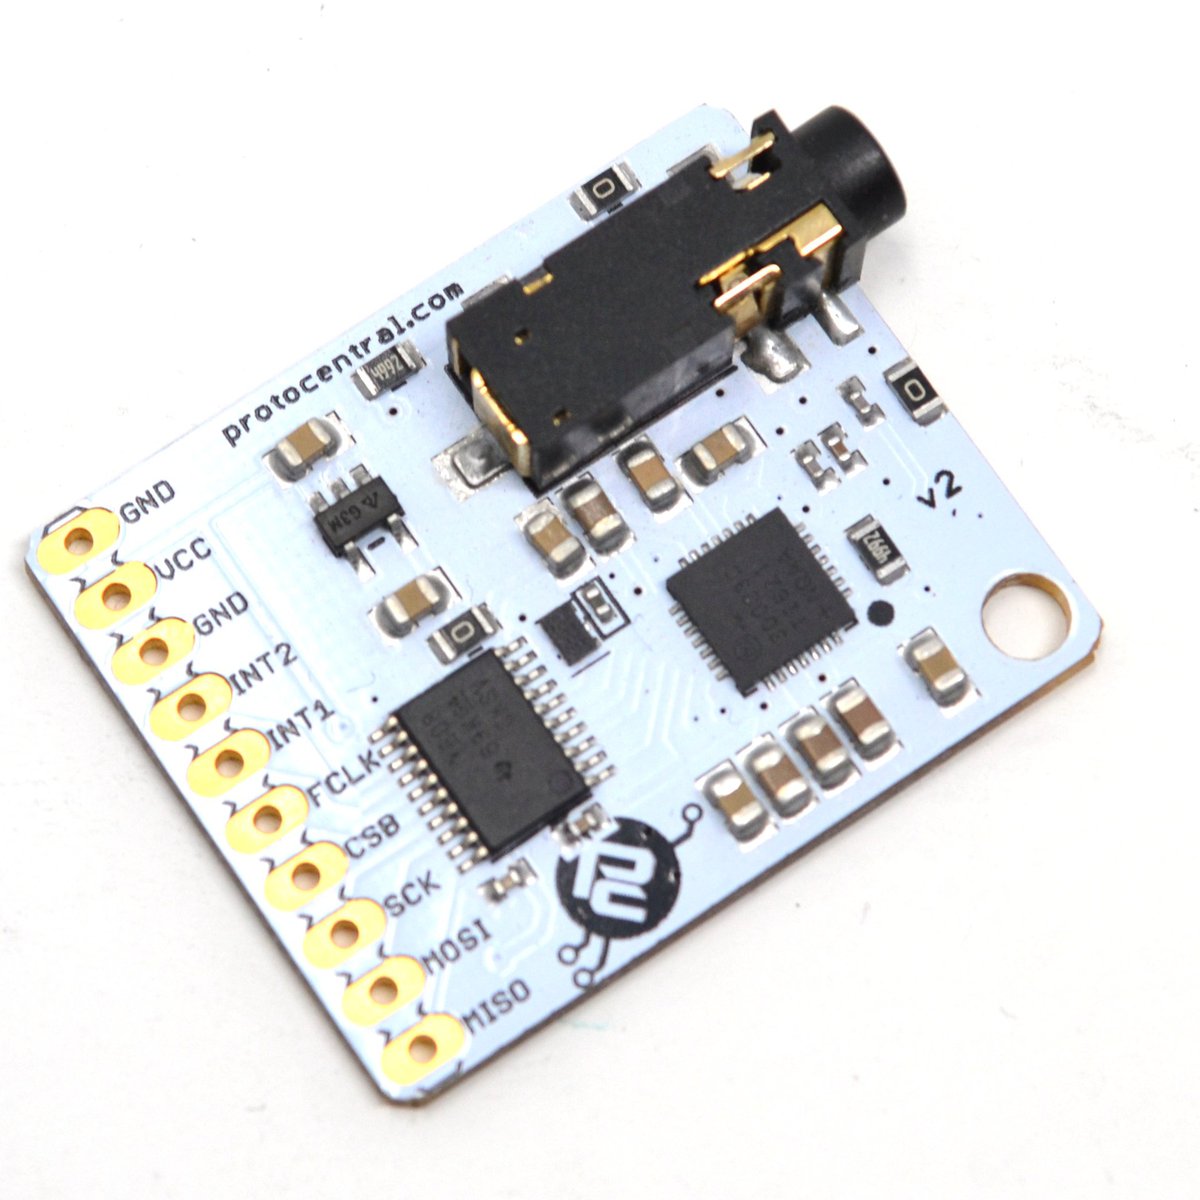 a) MAX3000x development kit for control of (b) MAX30001 IC and